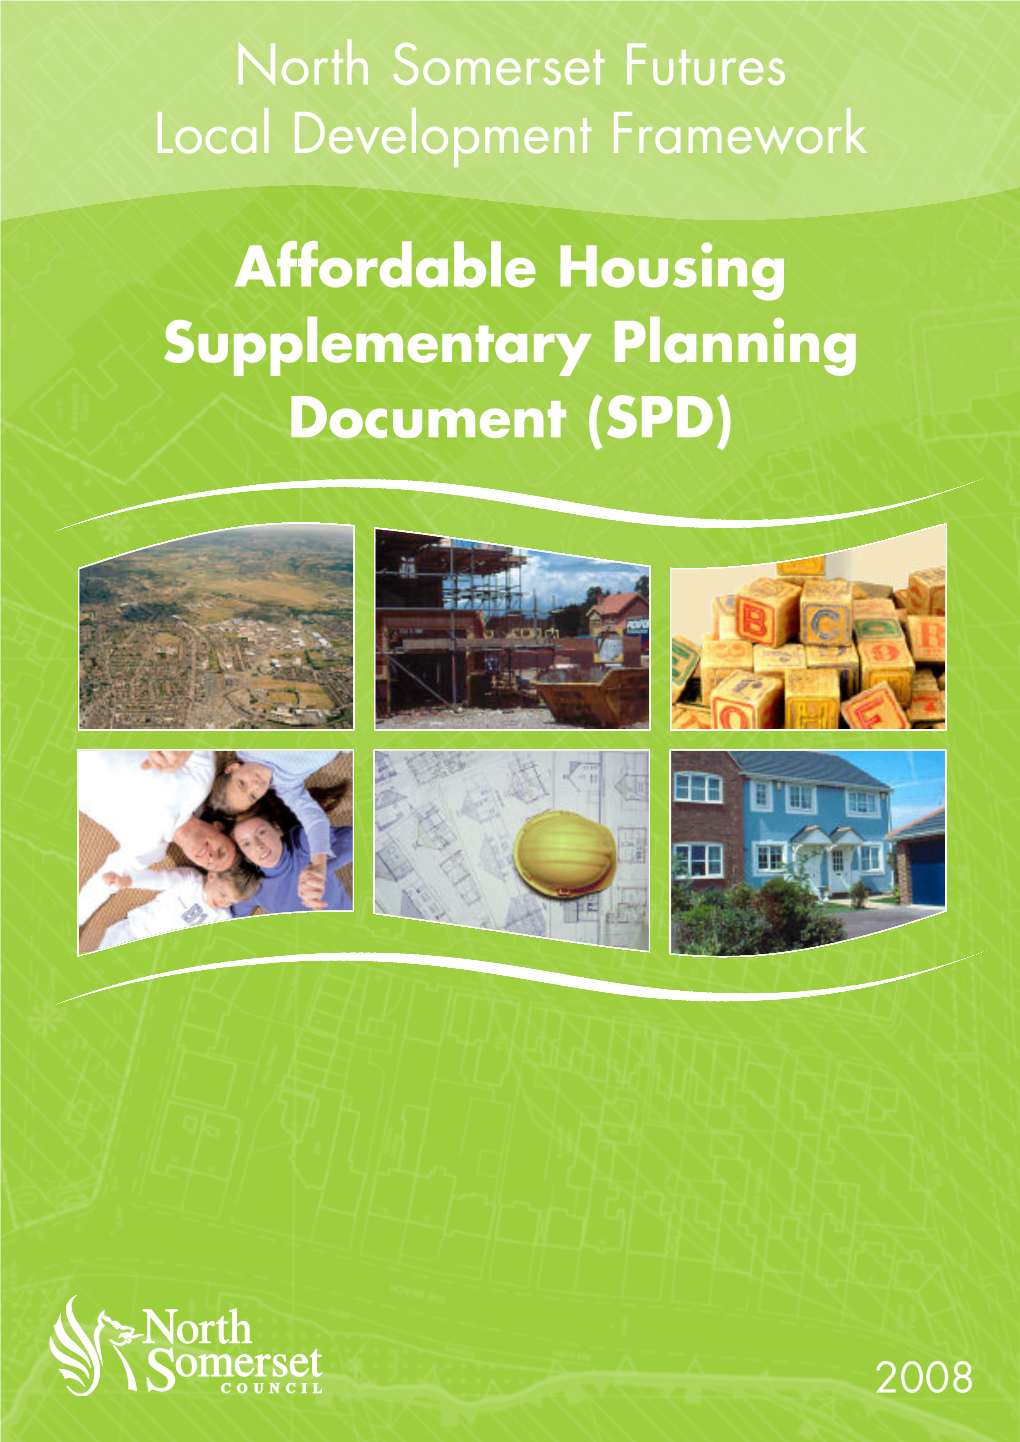 Affordable Housing Supplementary Planning Document (SPD)